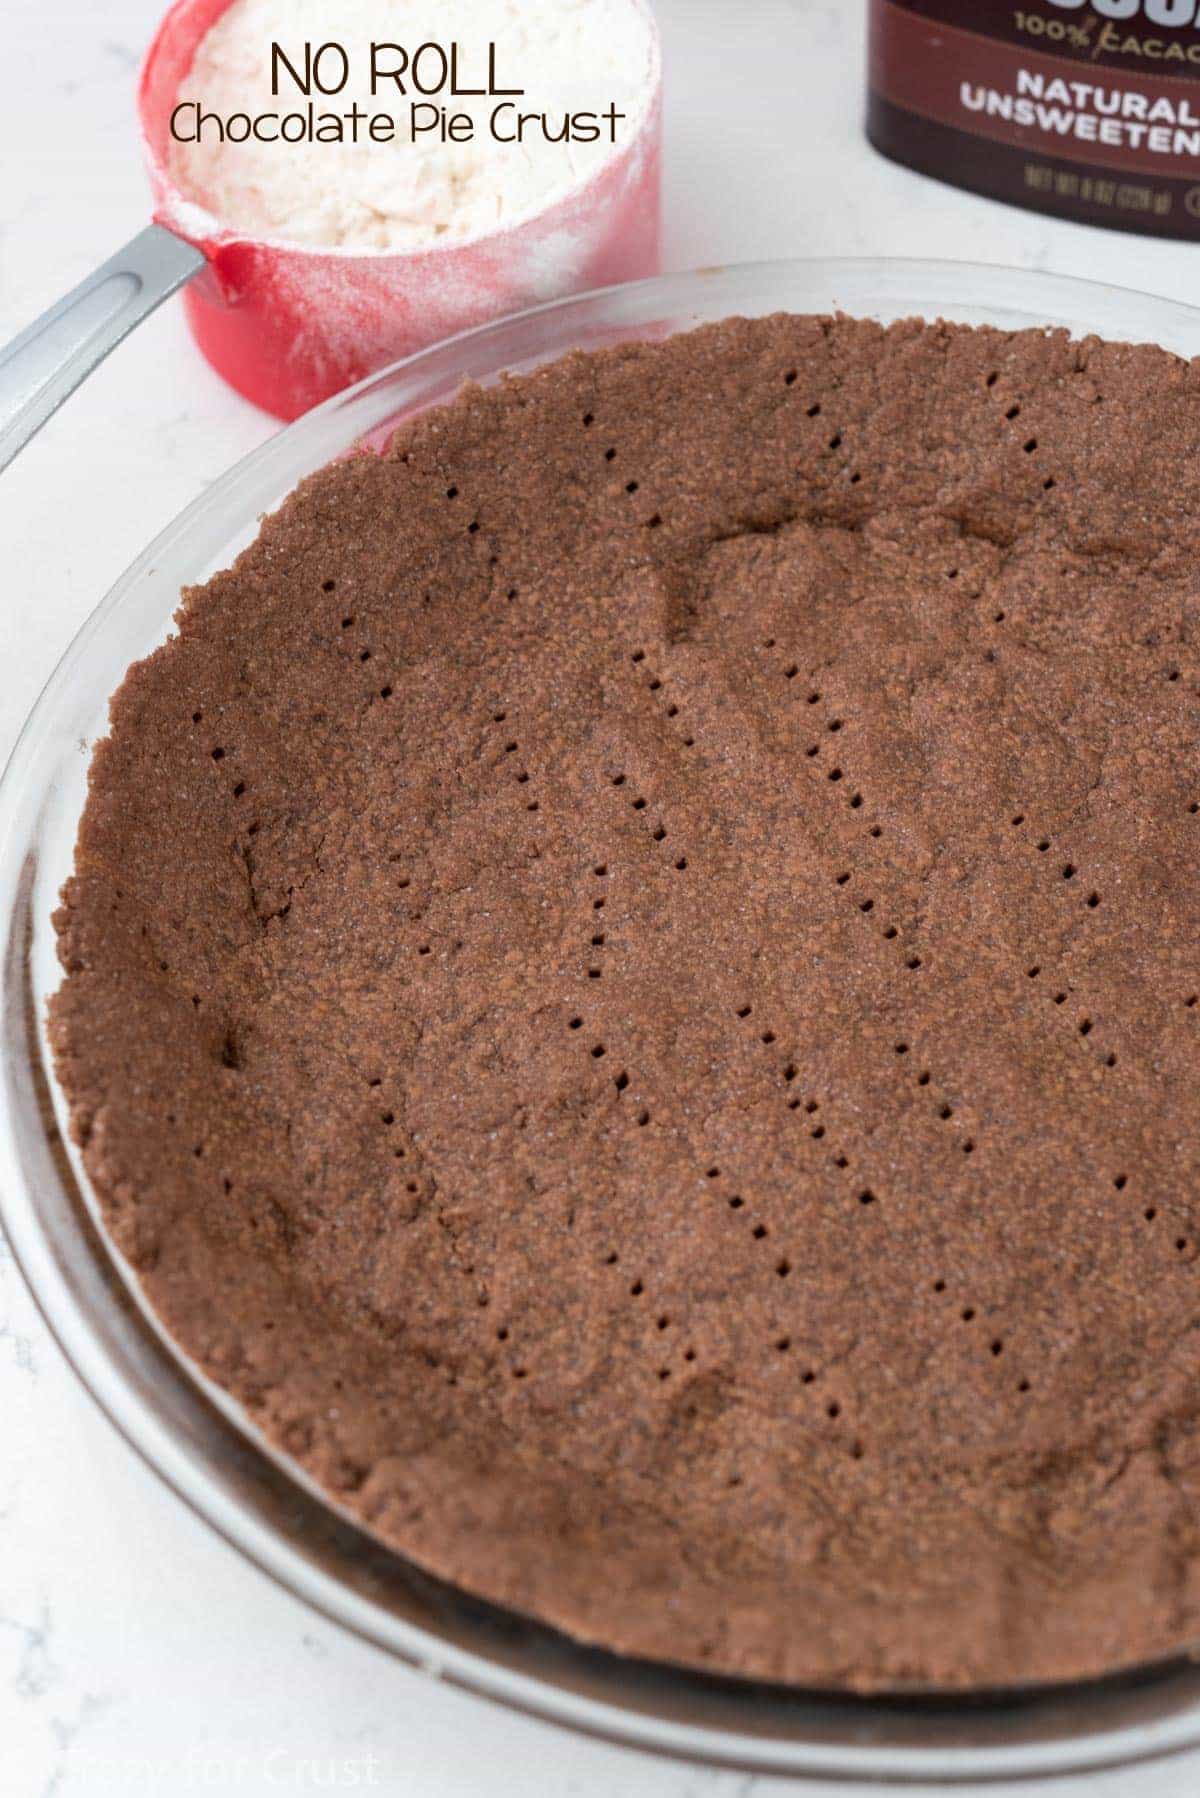 No Roll Chocolate Pie Crust - an easy pie crust recipe that's CHOCOLATE! Just mix it up in a food processor and press it into the pan , no rolling!